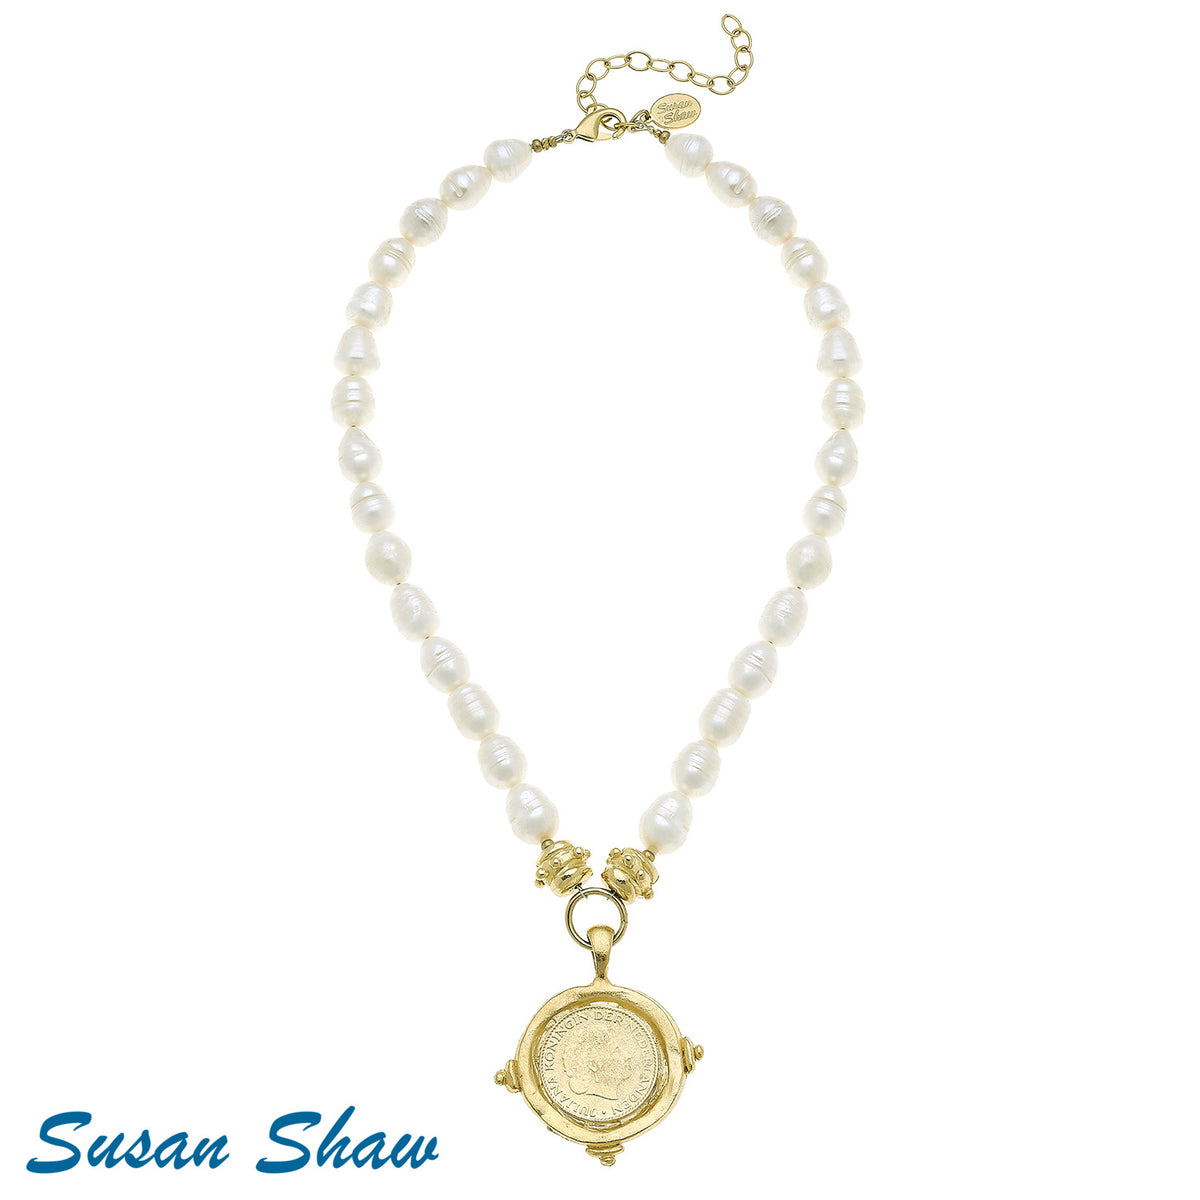 Handcast Gold Coin Intaglio Pendant on Genuine Freshwater Pearl Necklace